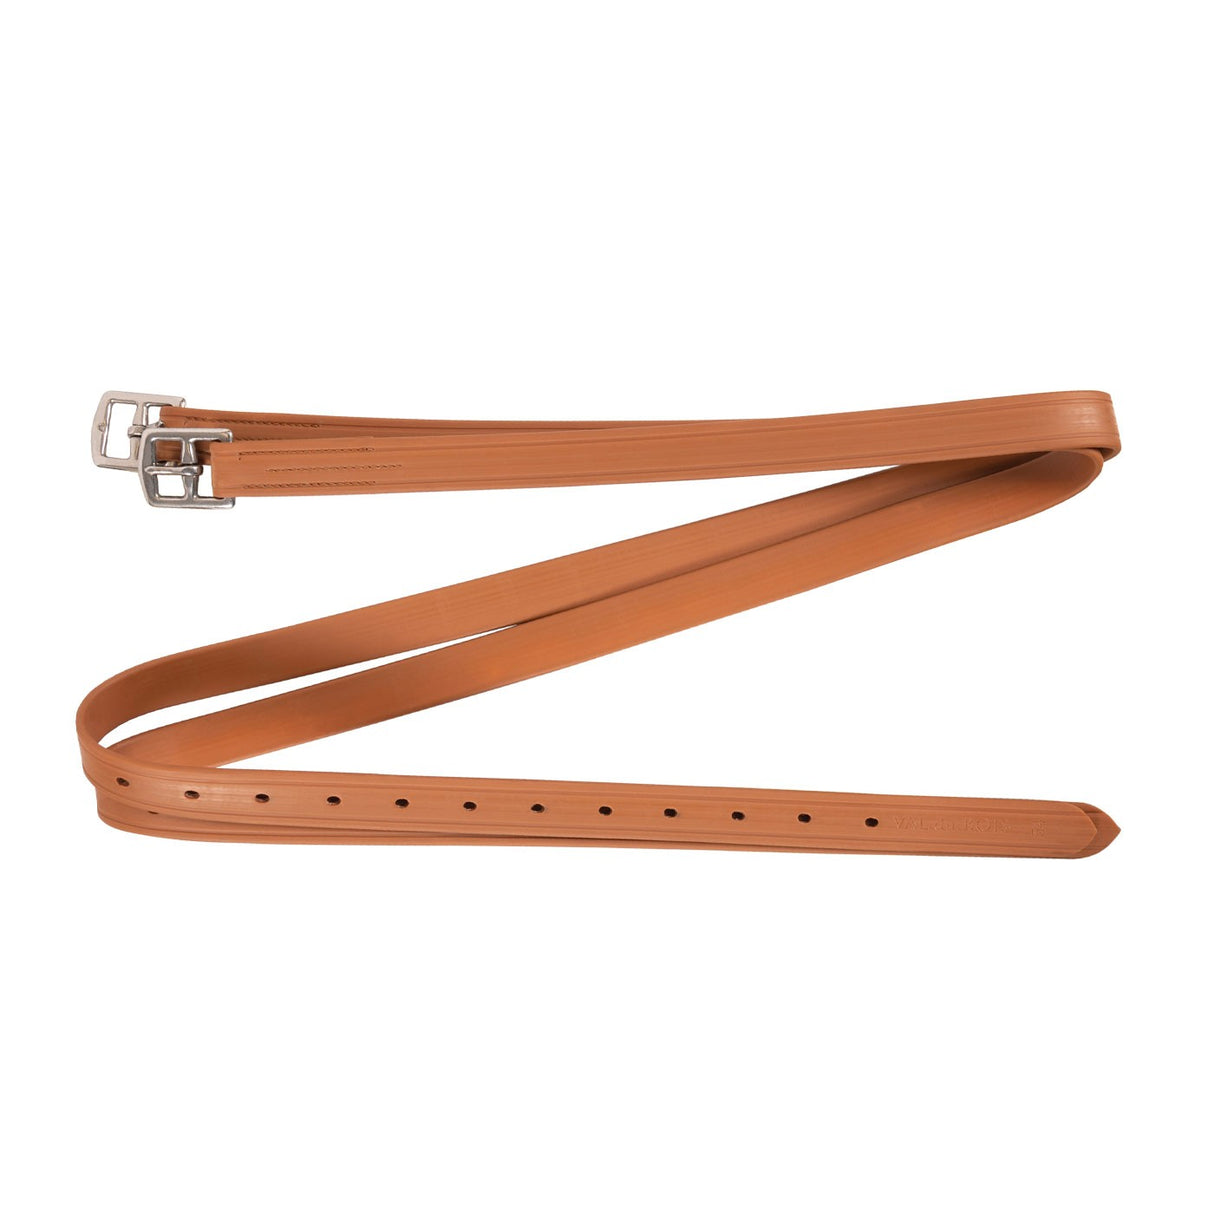 Women's Belt — LEATHER BY VAL